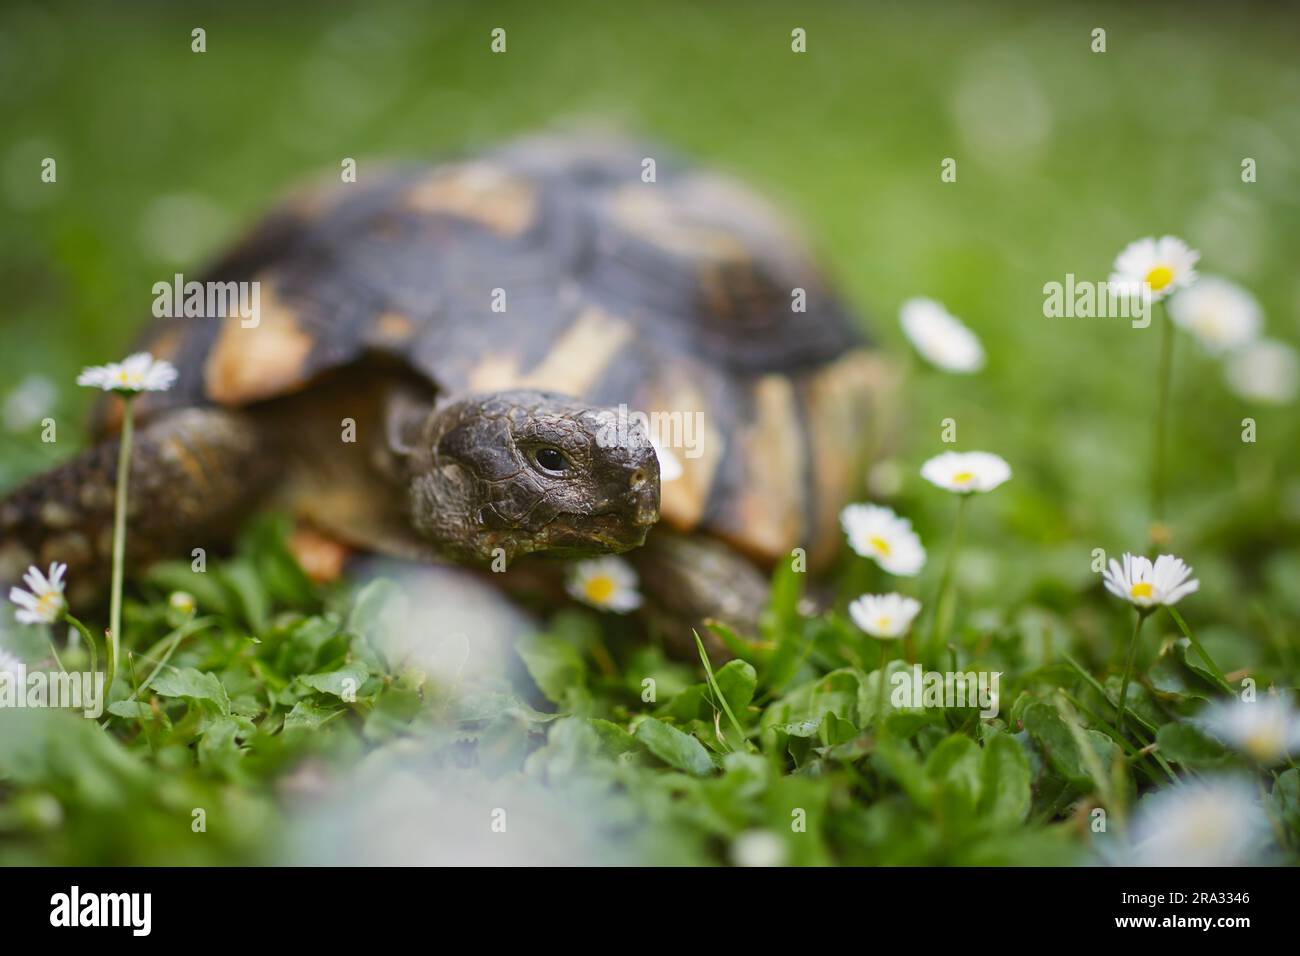 Turtle during slow walking in grass on back yard. Domestic life with pets. Stock Photo